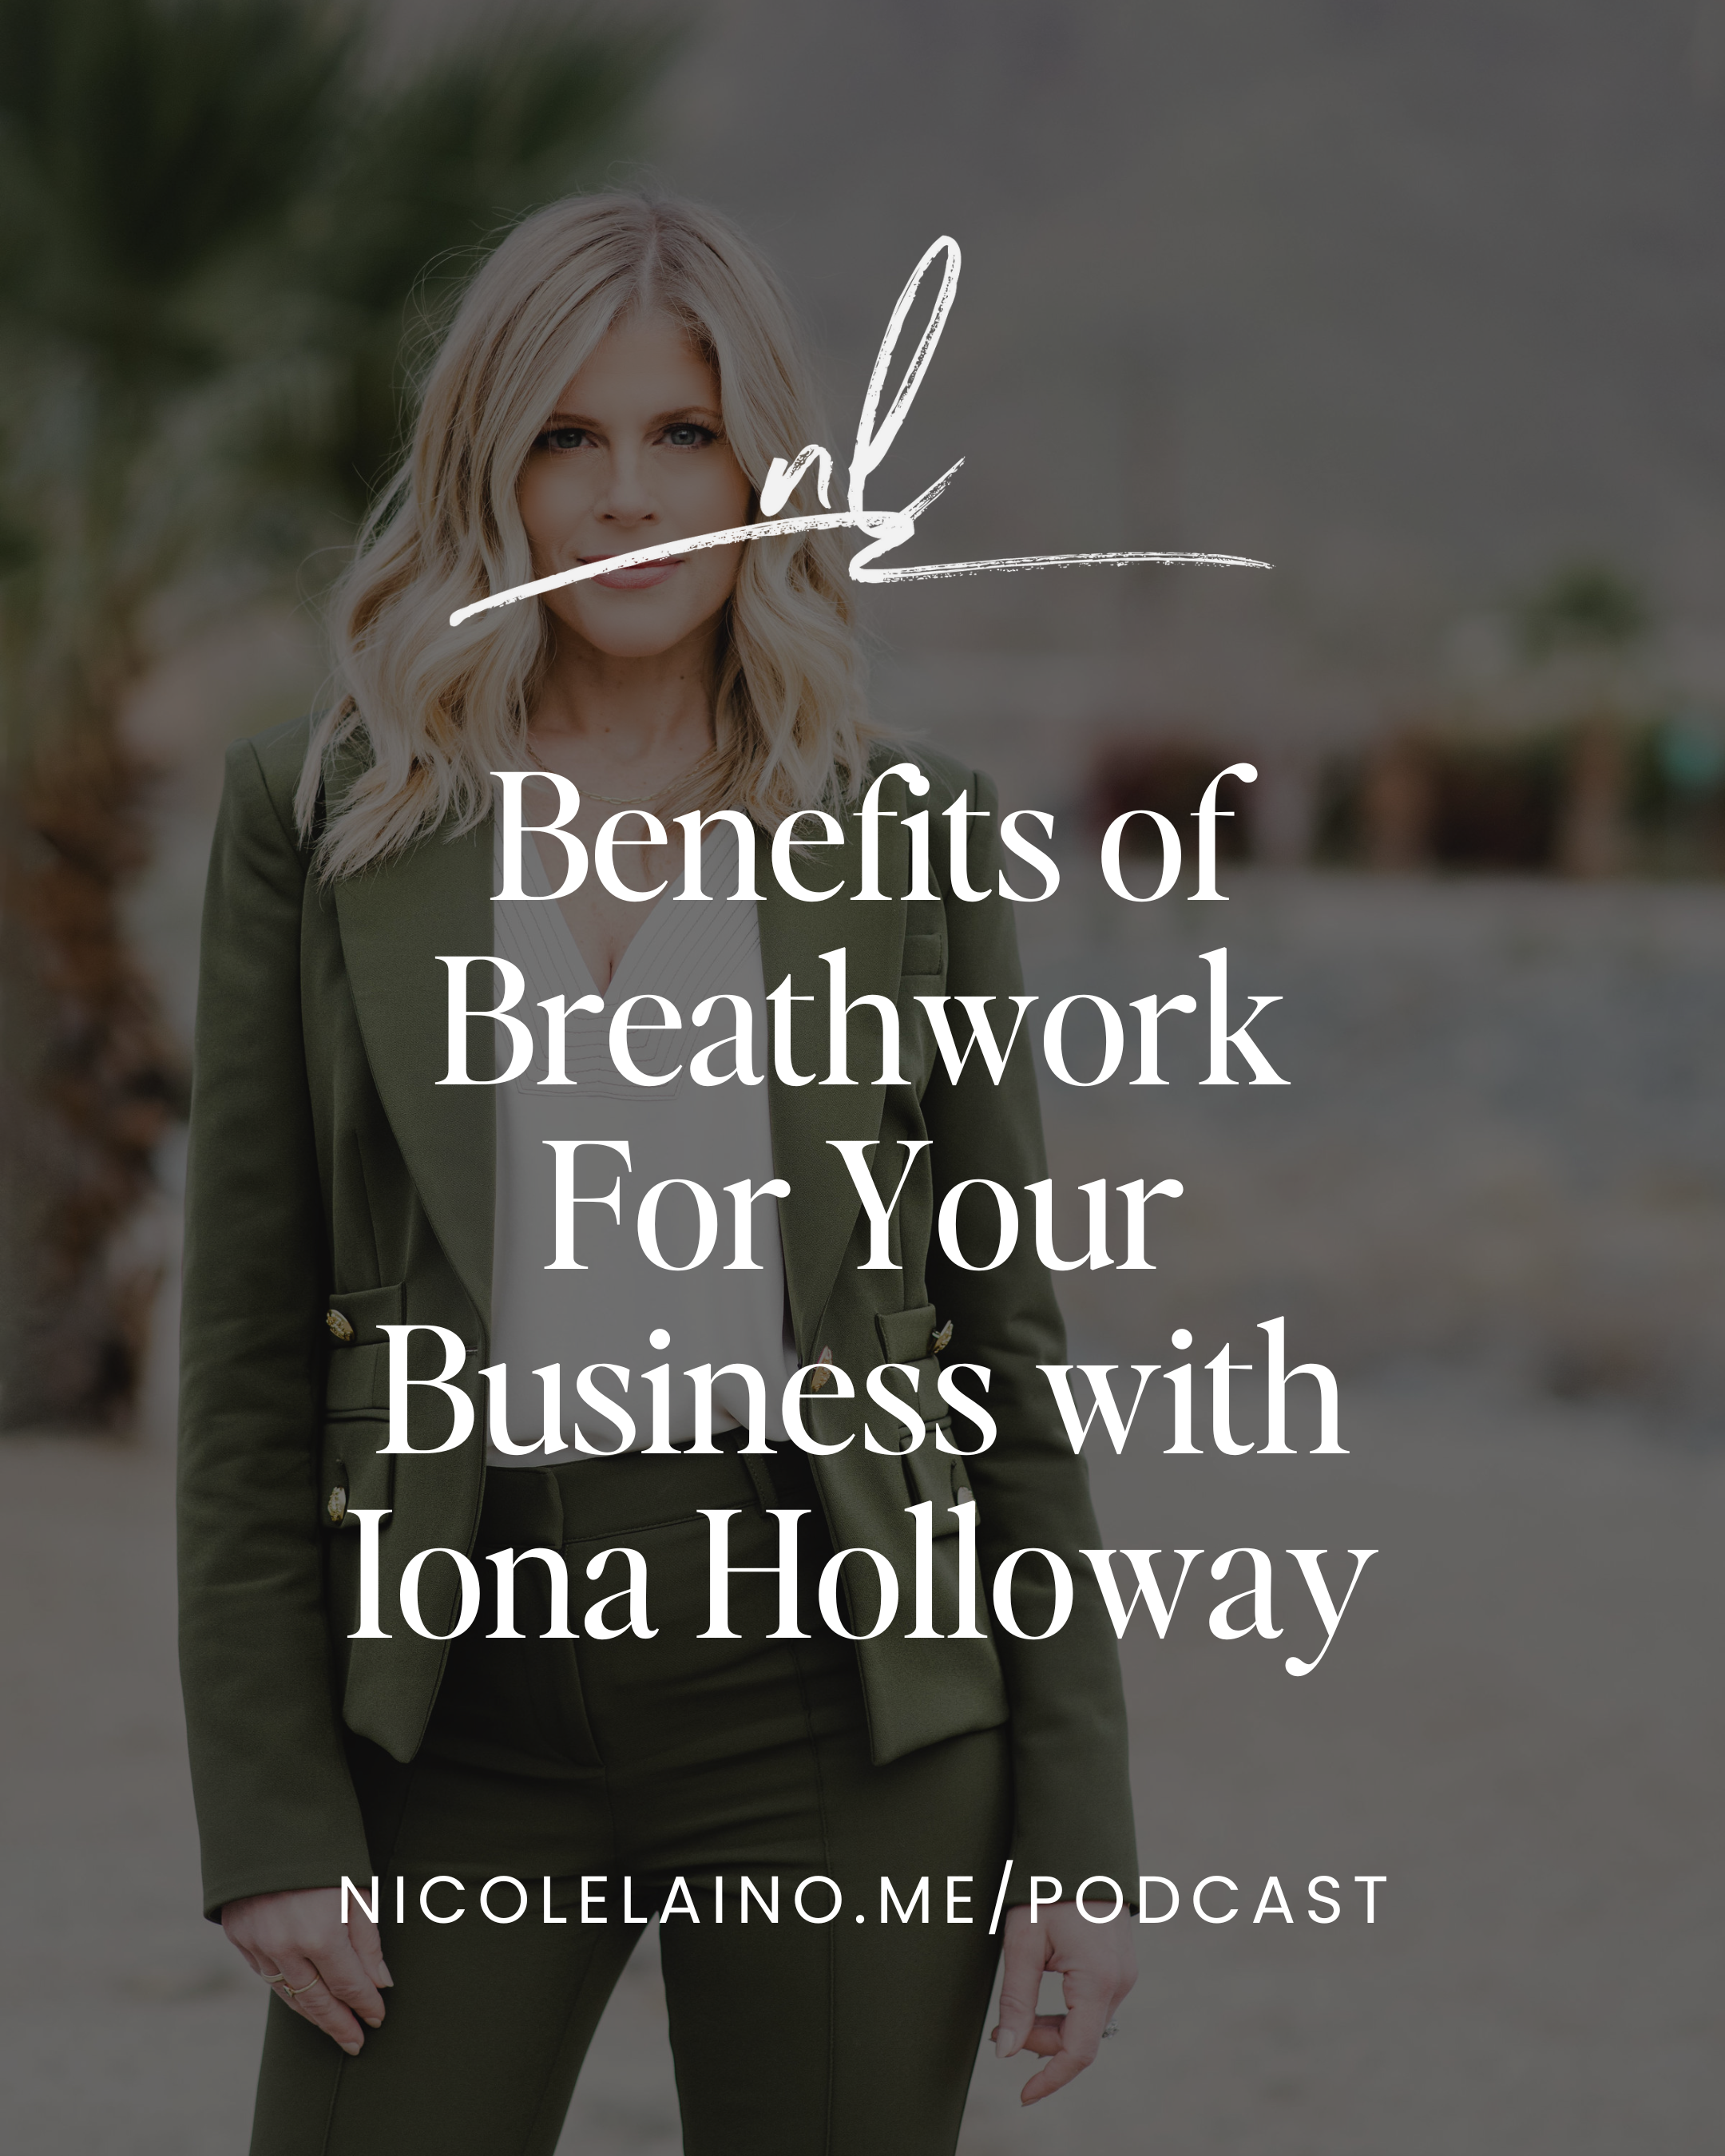 Benefits of Breathwork For Your Business with Iona Holloway